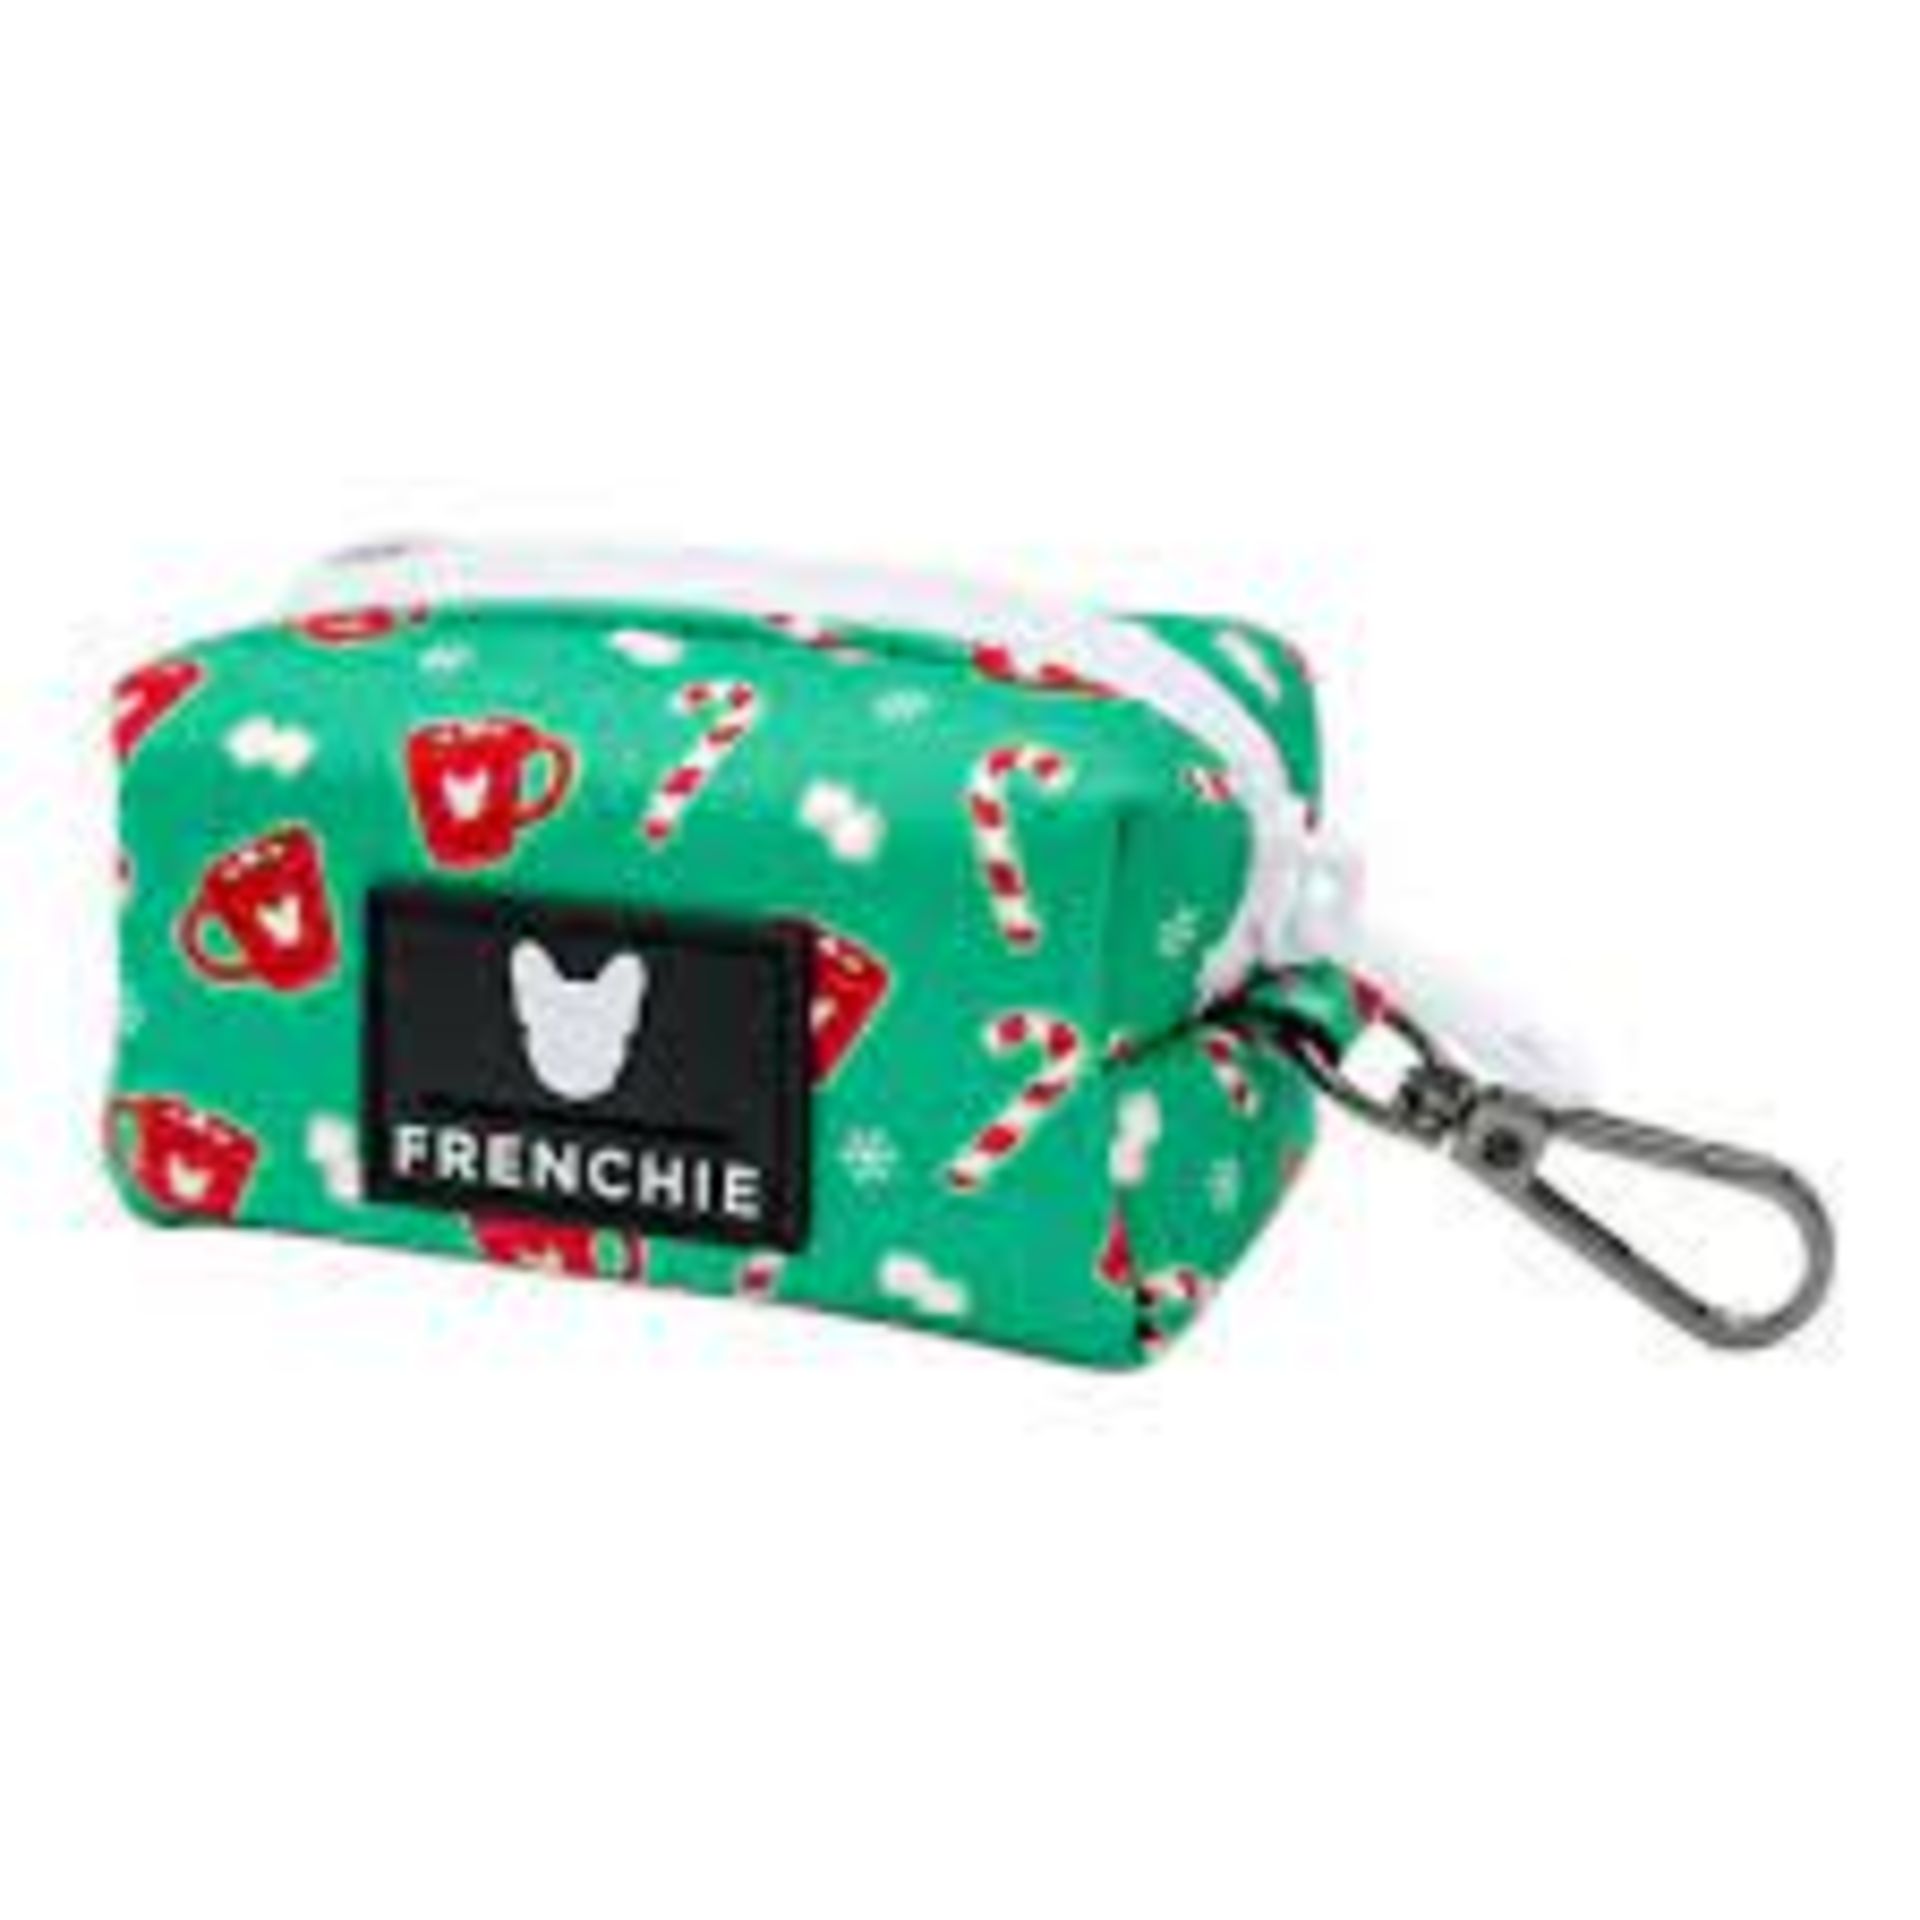 Bulk Trade Lot 500 X New .Packaged Frenchie The Bulldog Luxury Branded Dog Products. May include - Image 3 of 50